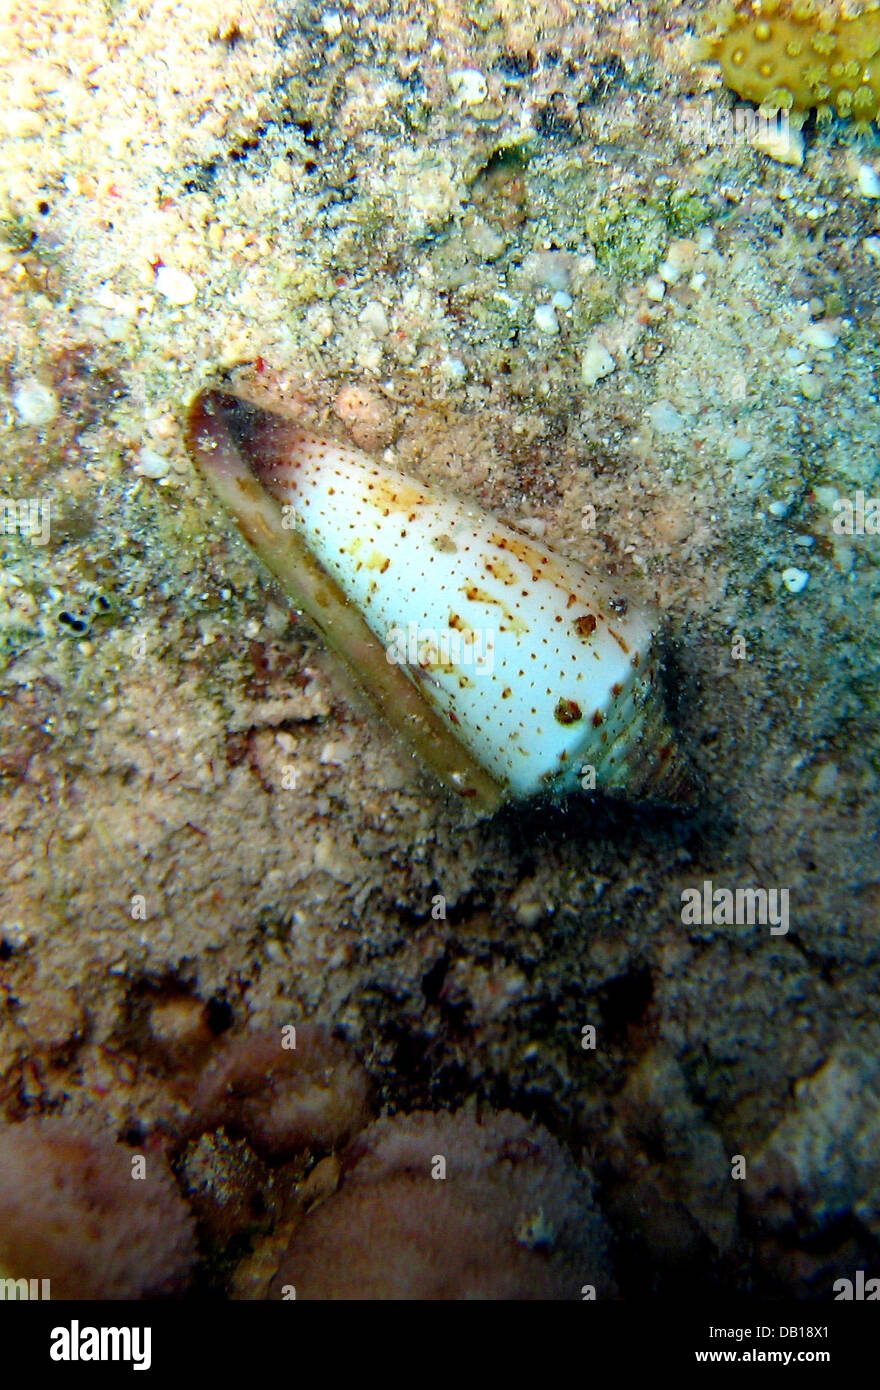 A venomous cone snail is pictured in the Red Sea near Dahab, Egypt, 07 November 2007. Photo: Stephan Jansen Stock Photo